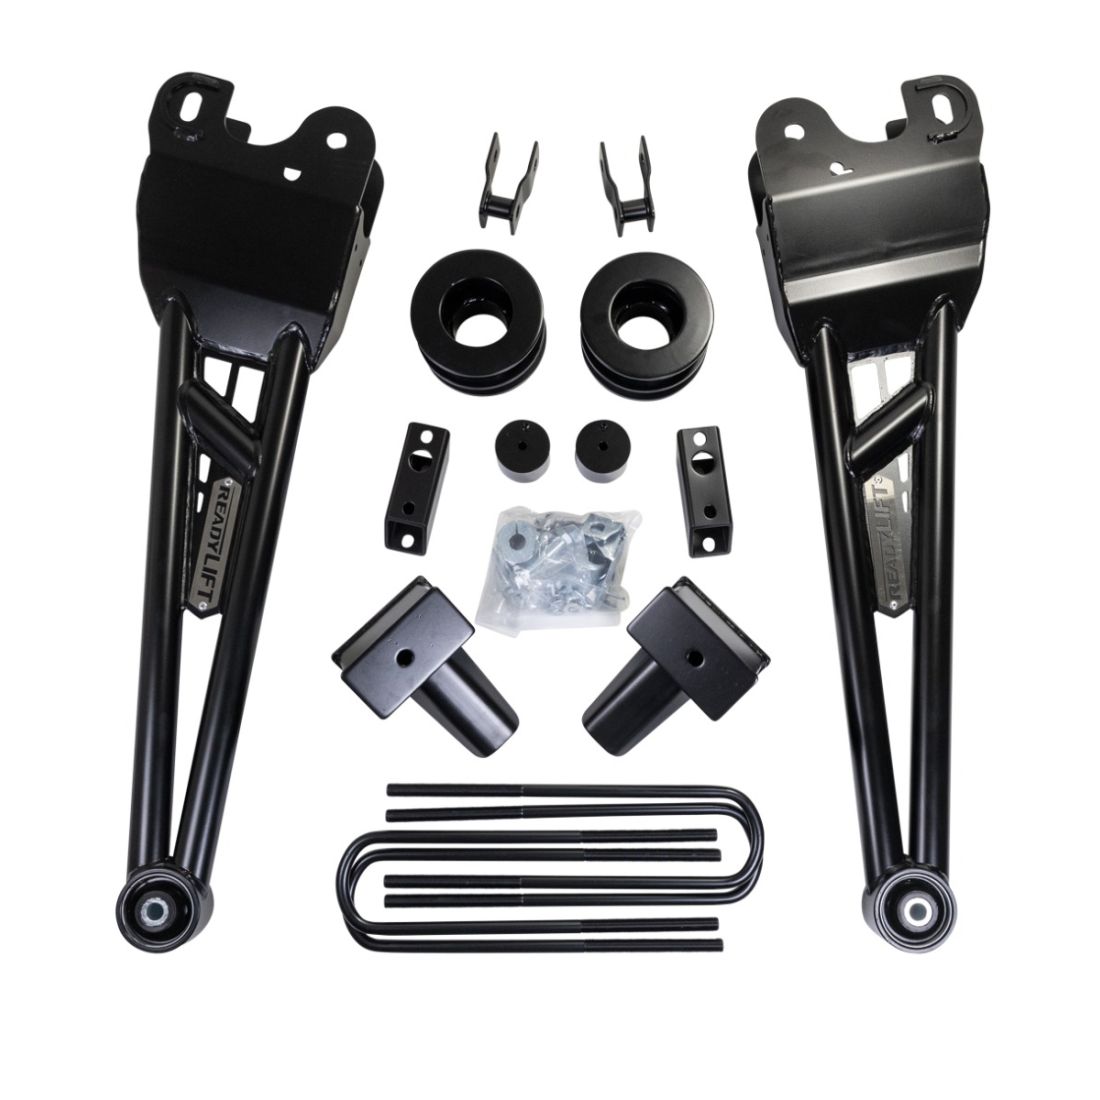 ReadyLIFT  2.5 SST Lift Kit - 2017-2019 Ford Super Duty 4WD - for 2-piece  drive shaft